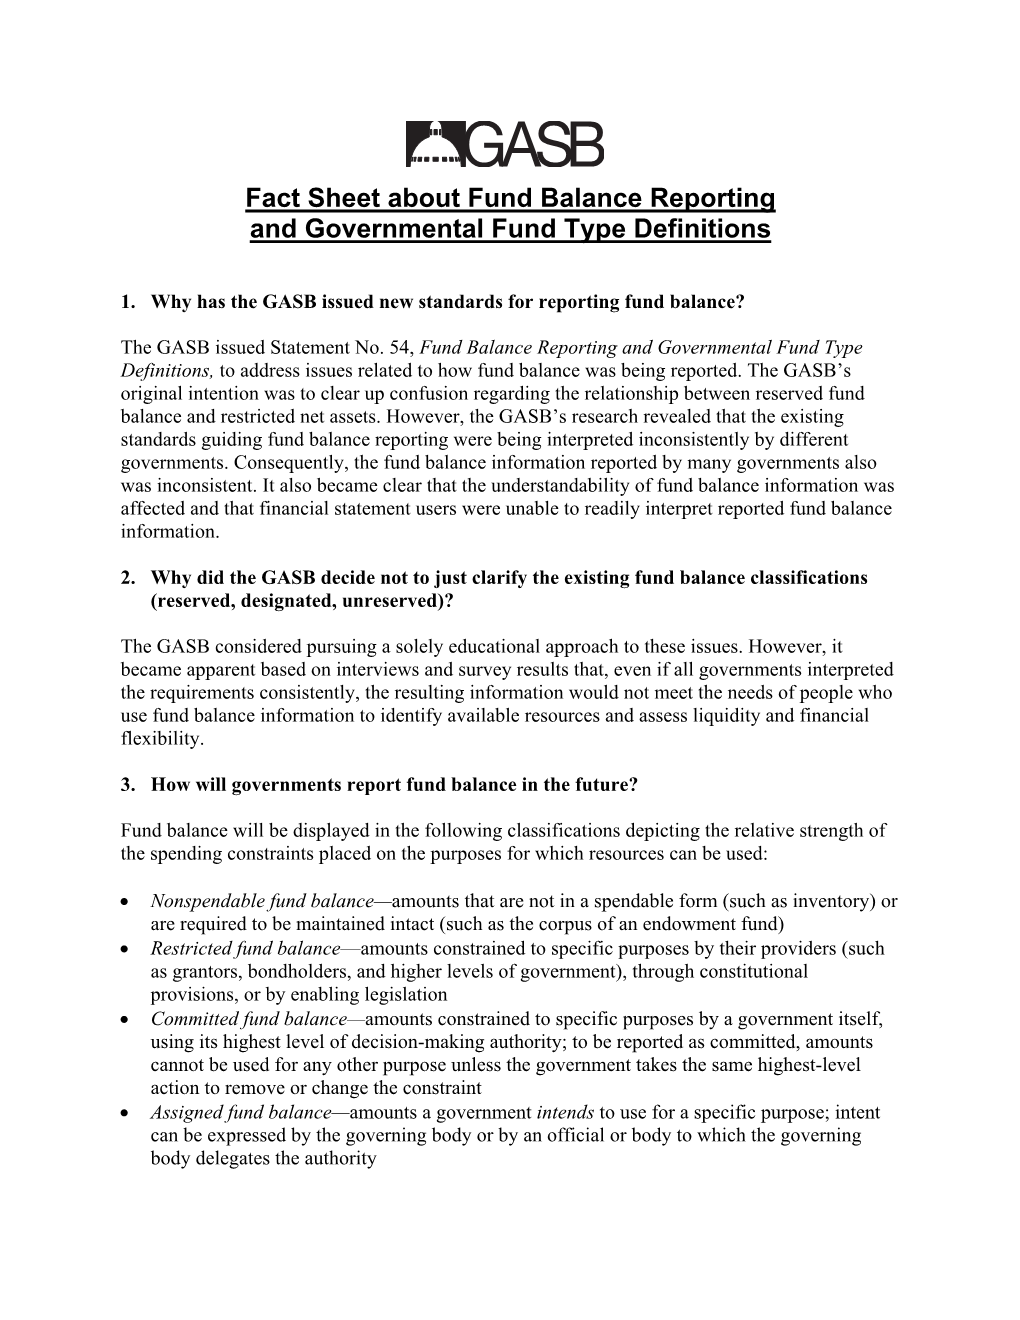 Fact Sheet About Fund Balance Reporting and Governmental Fund Type Definitions